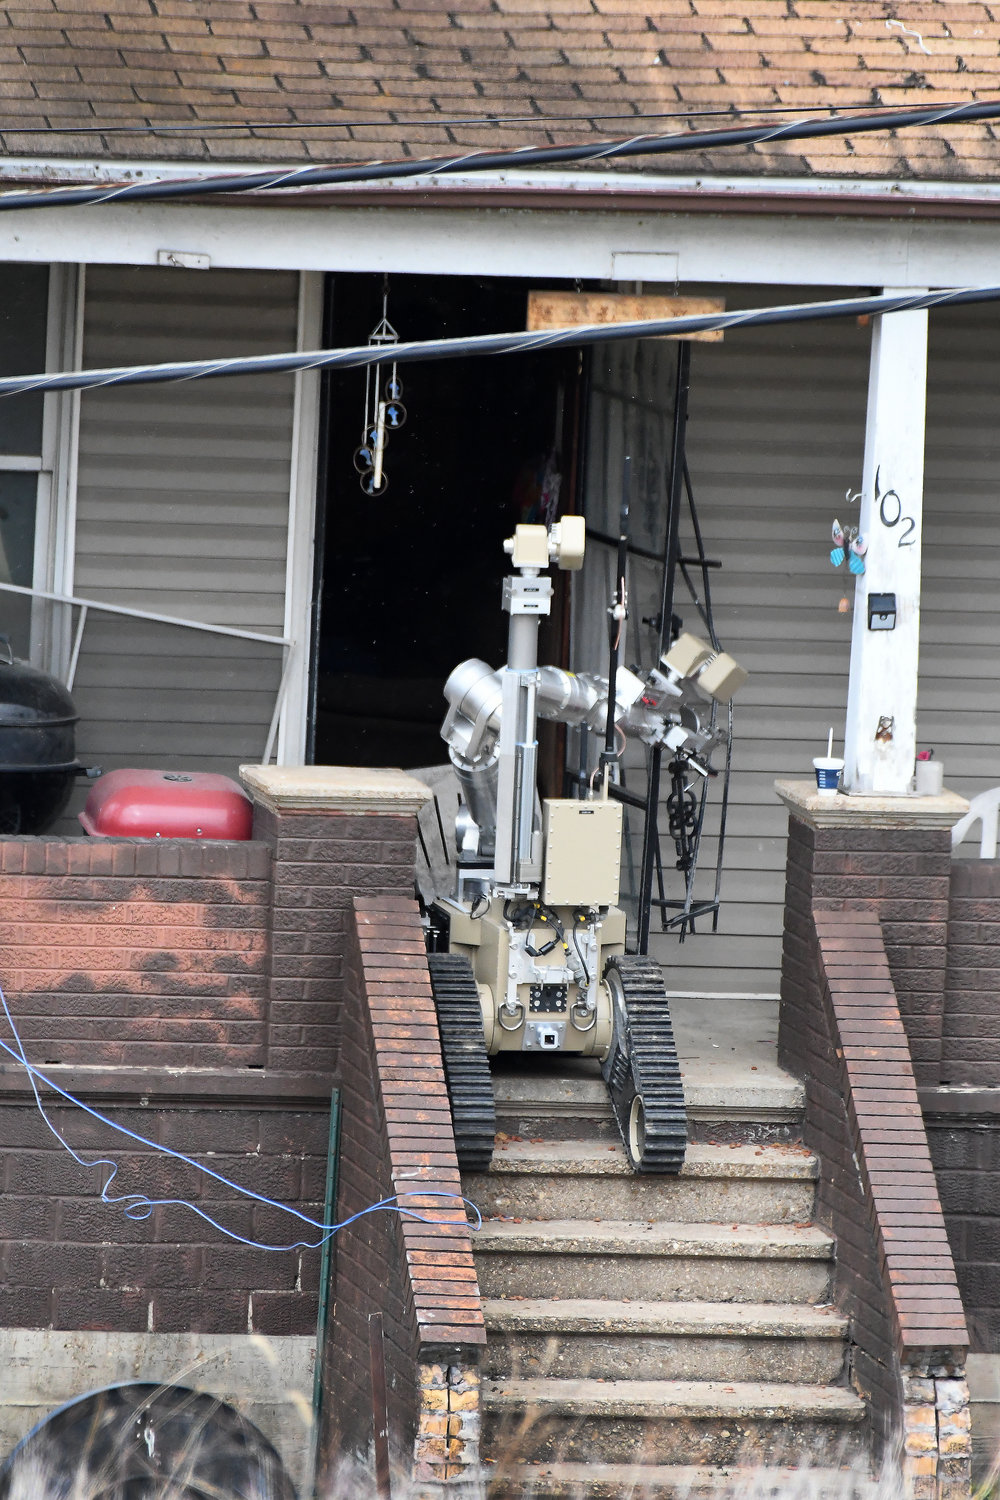 A MSHP ROBOT removes the screen door at 102 Market Street in Hermann on Monday. Drones were also used in an attempt to inspect the home’s interior for signs of the suspect, Kenneth Lee Simpson.